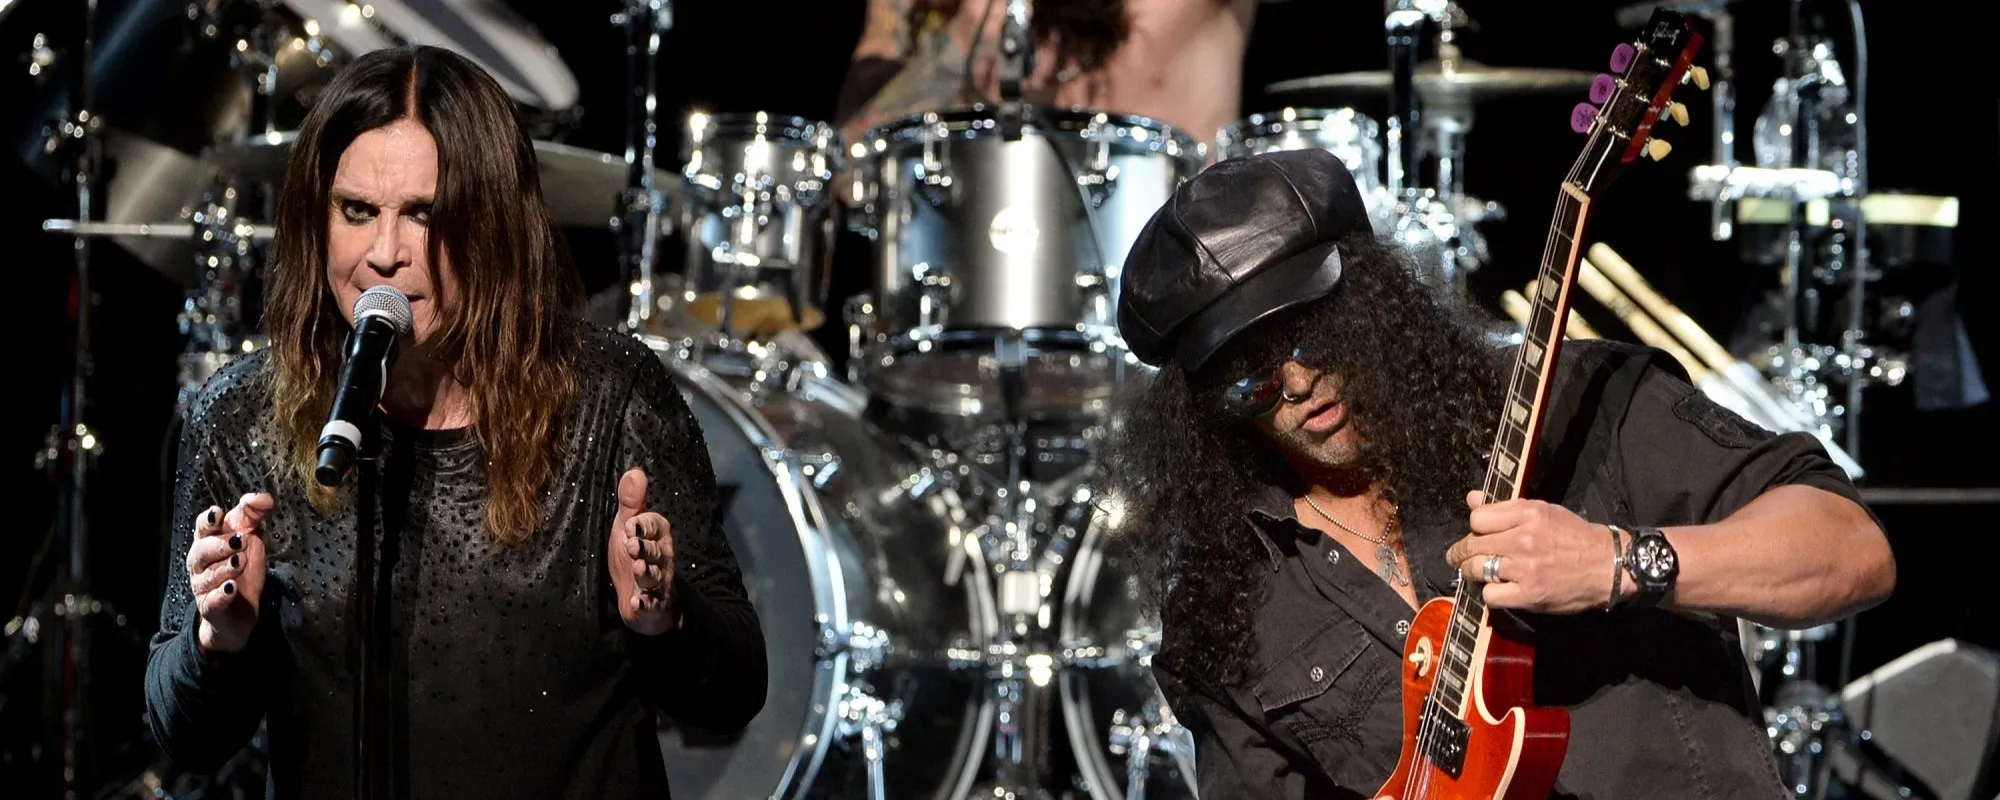 Slash Reacts to Ozzy Osbourne’s “No-Brainer” Solo Induction into the Rock and Roll Hall of Fame